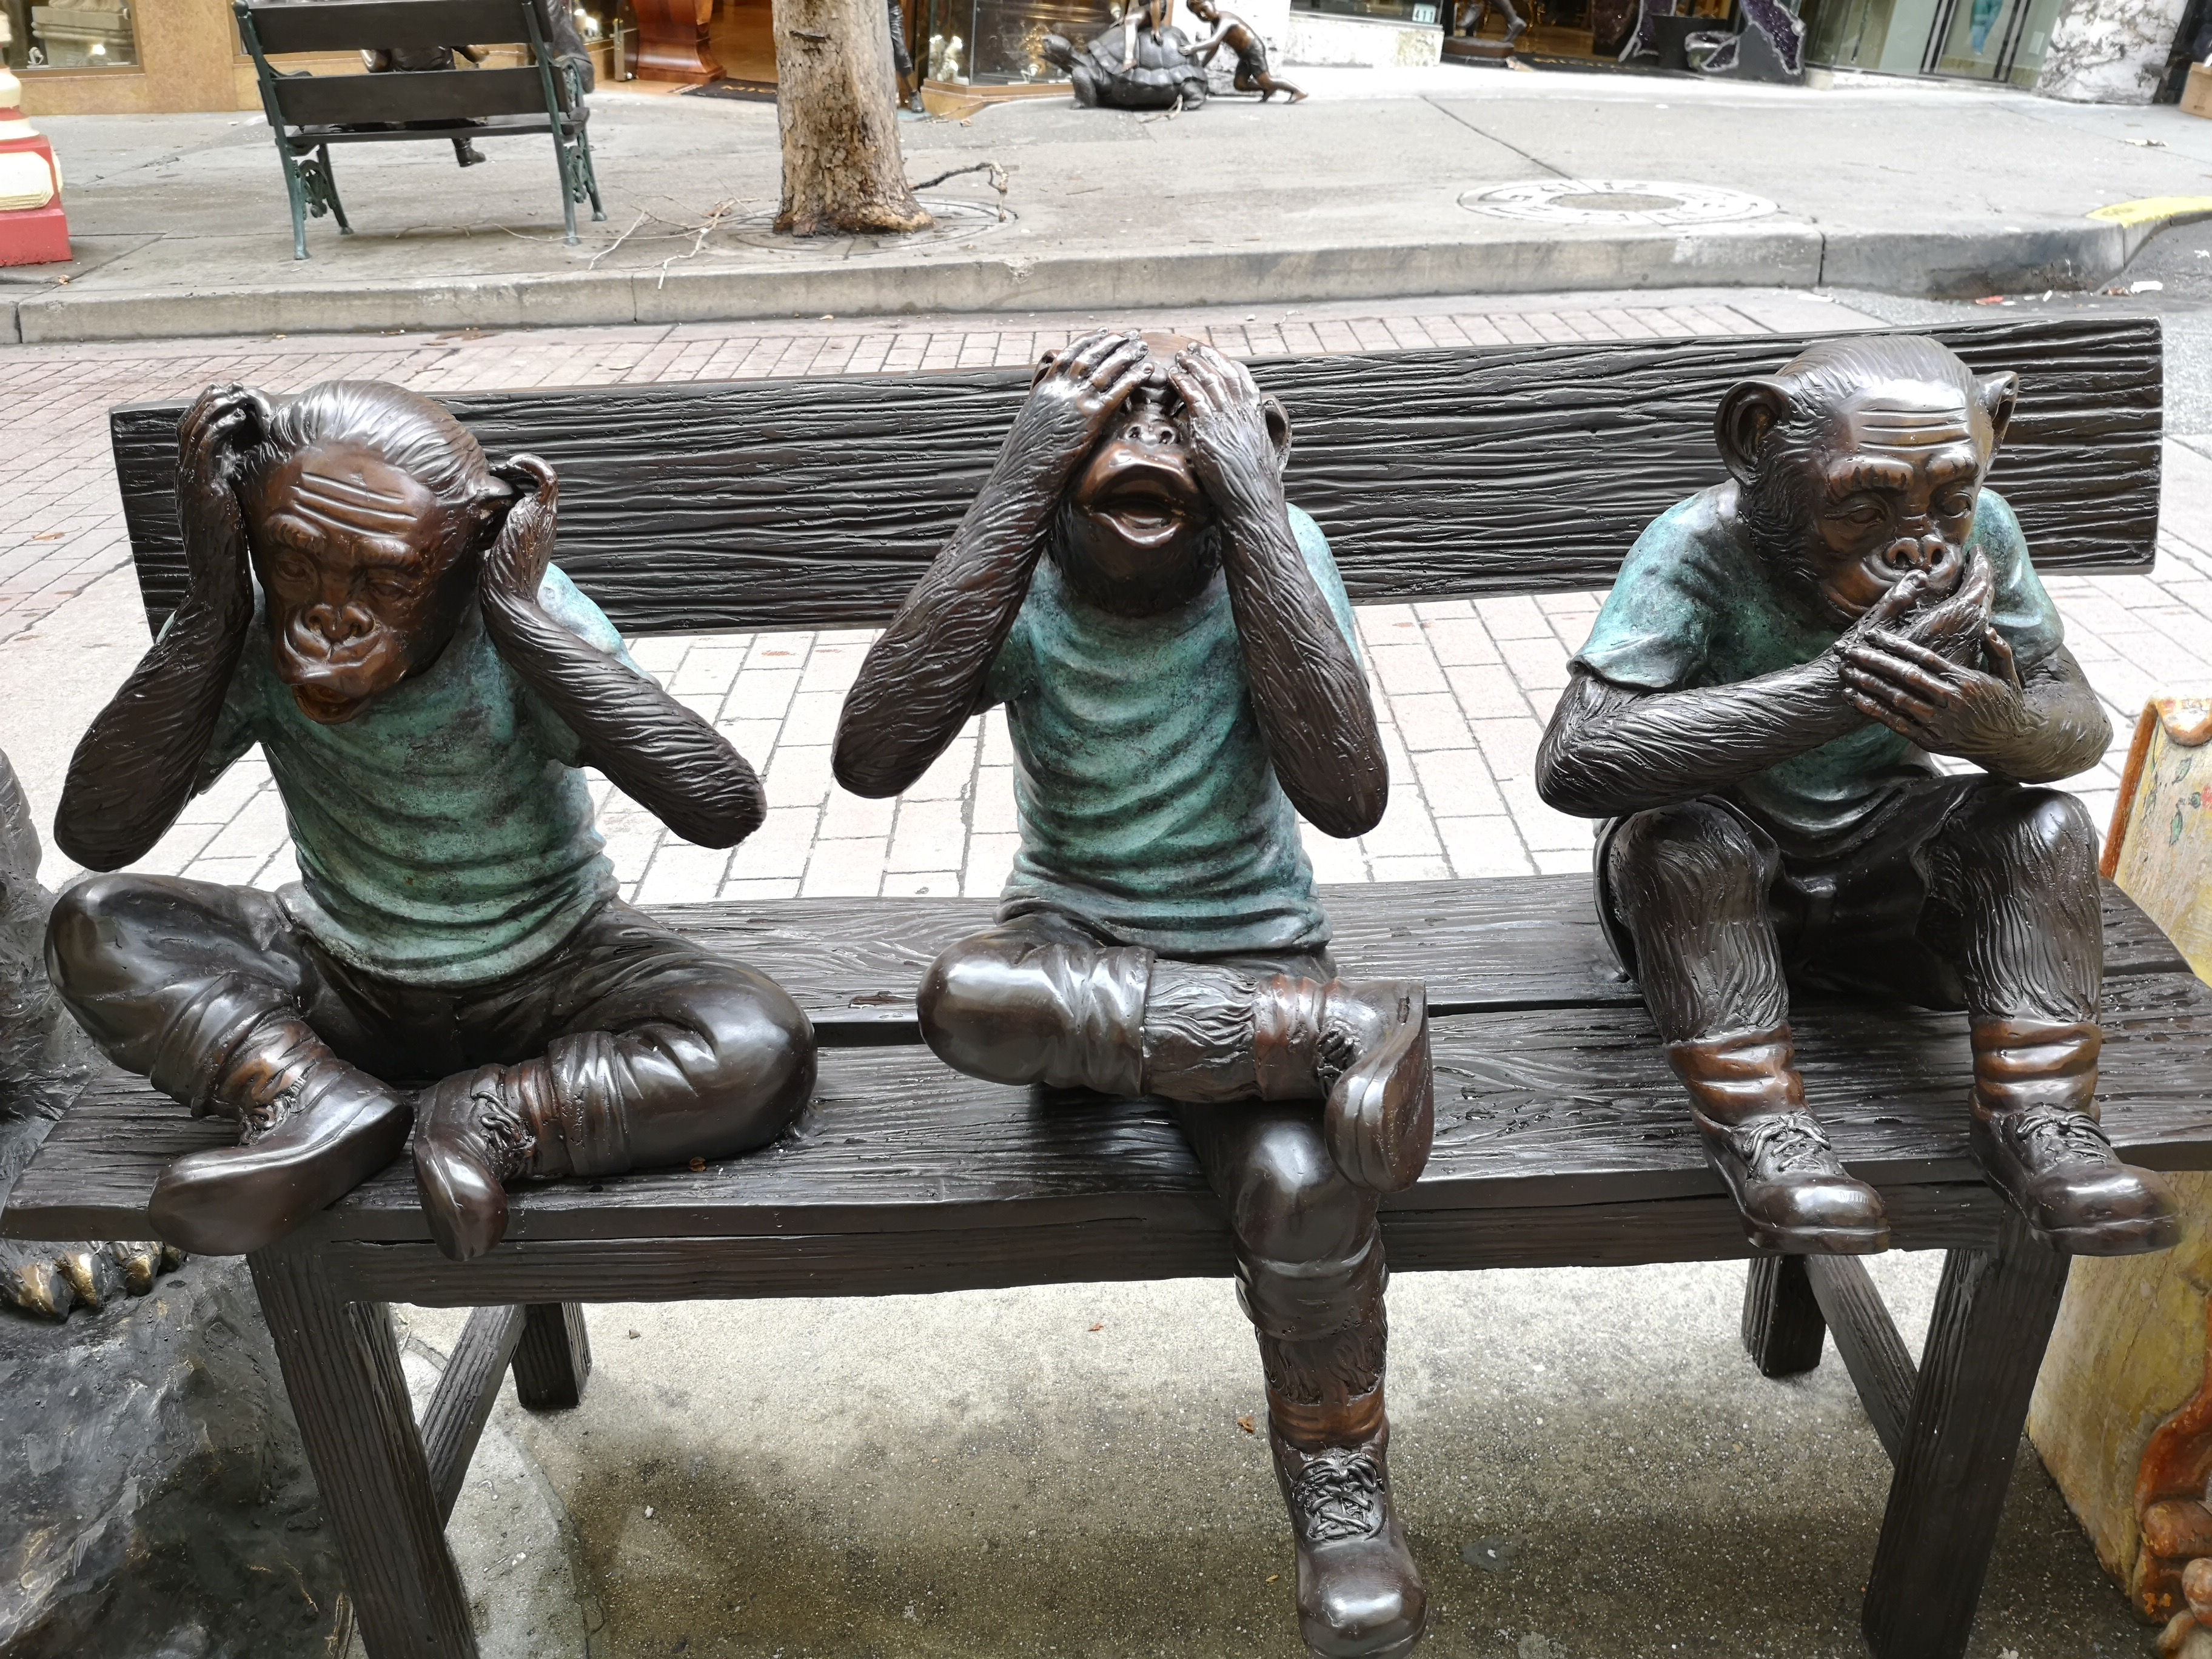 three monkeys sculpture picture taken with the HUAWEI P20 pro camera